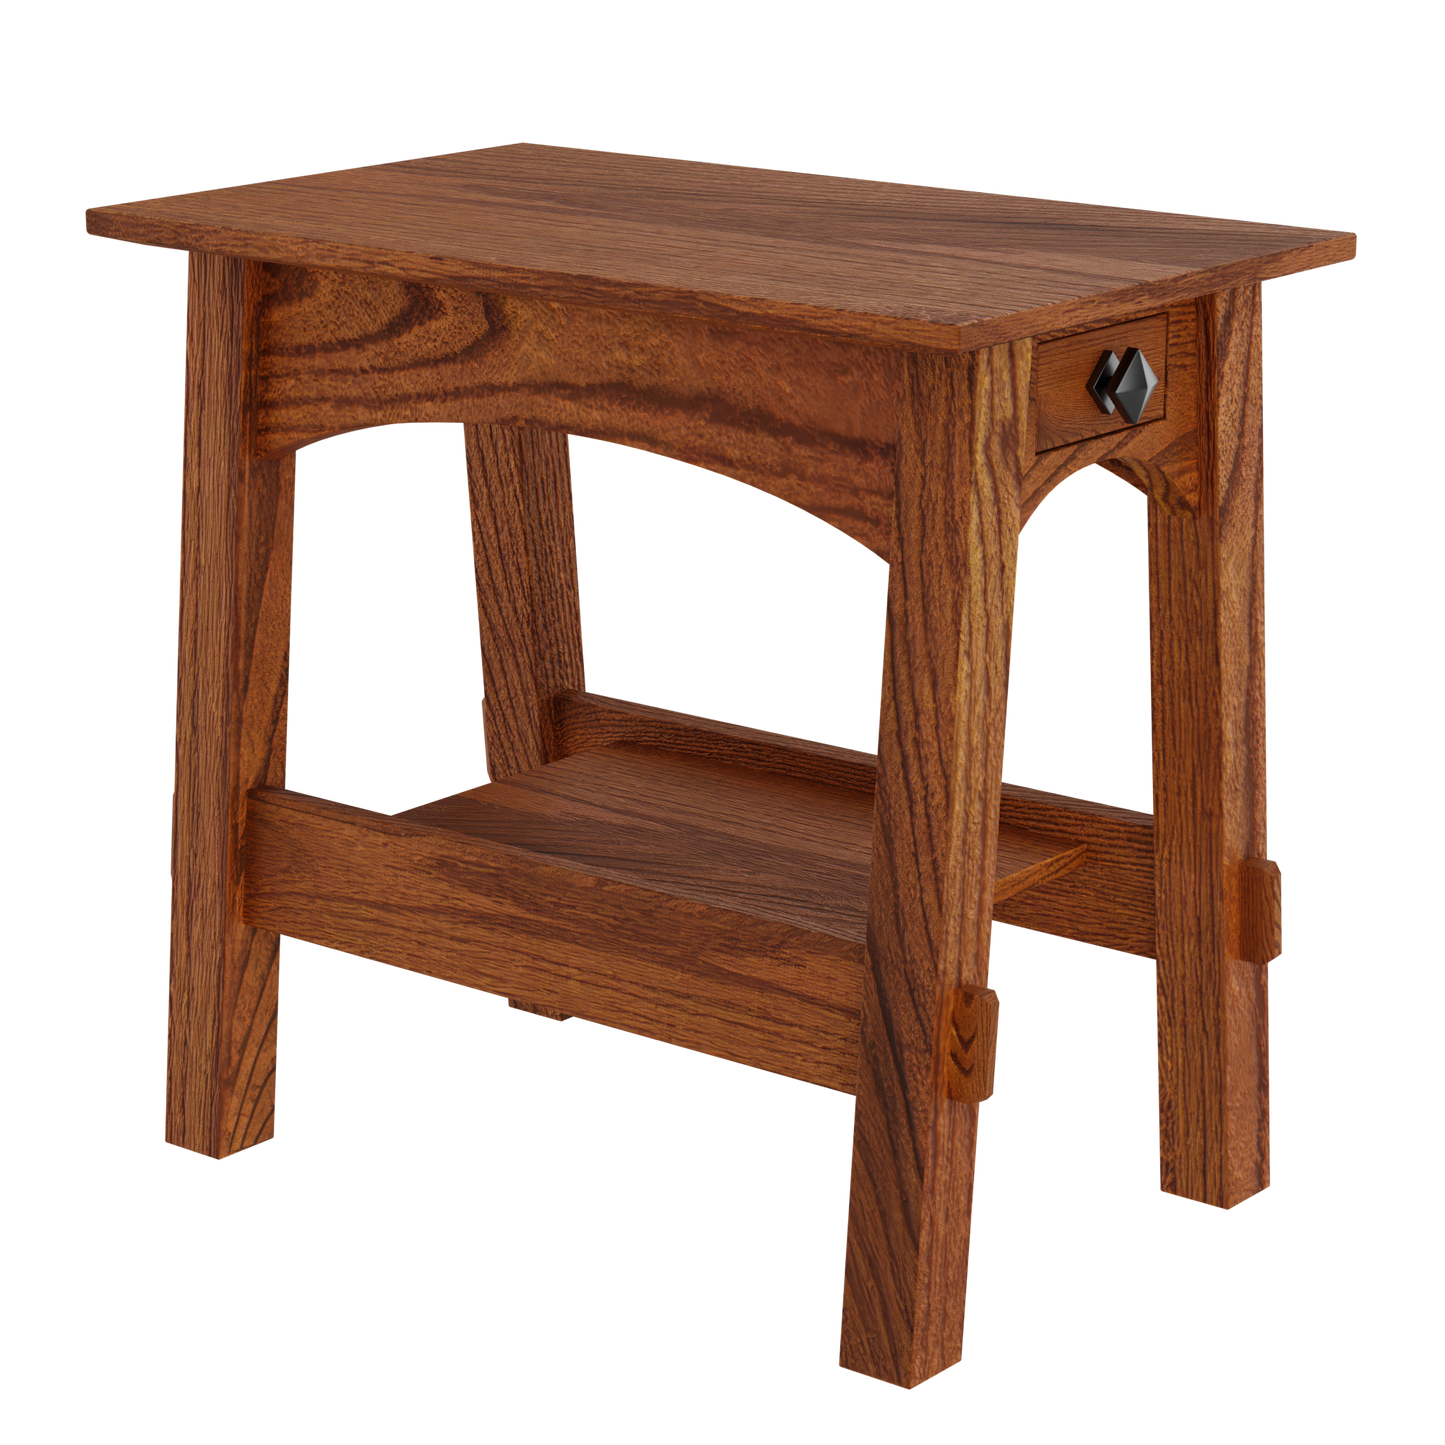 McCoy Craftsman Chairside Table with Drawer